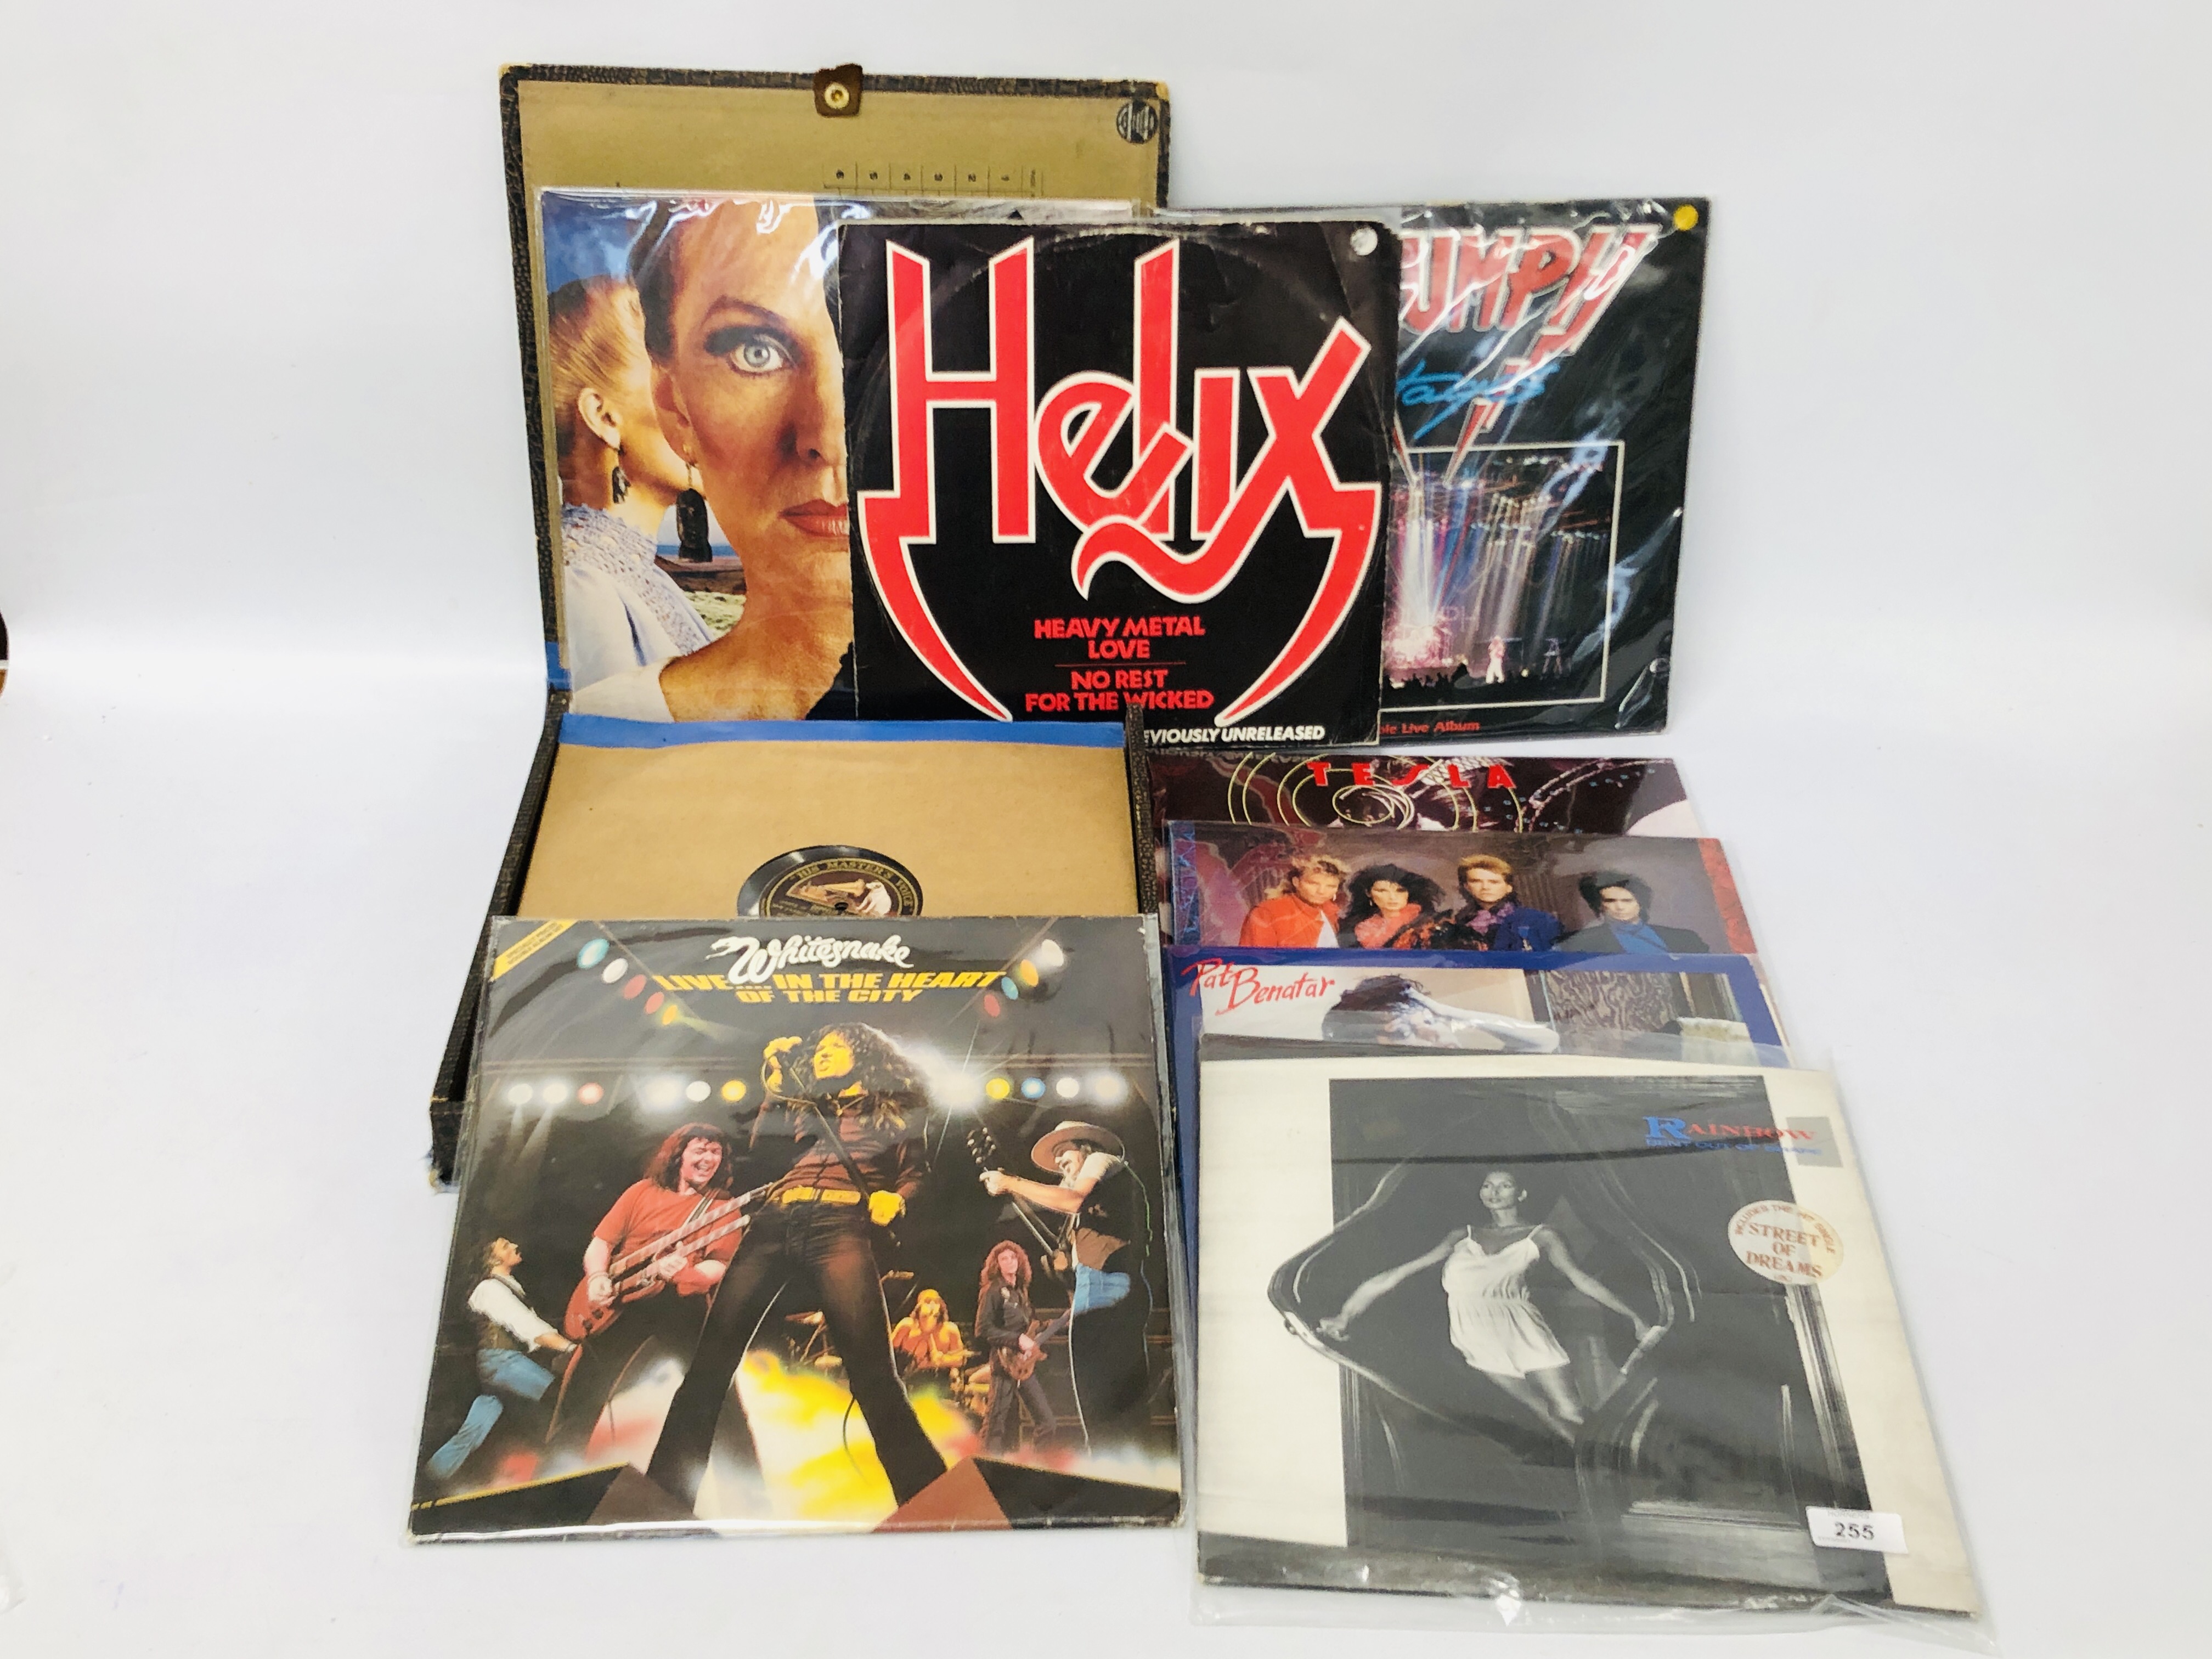 SMALL COLLECTION MIXED RECORDS TO INCLUDE WHITE SNAKE, PAT BENATAR, HEART, TESLA, TRIUMPH, STYX,